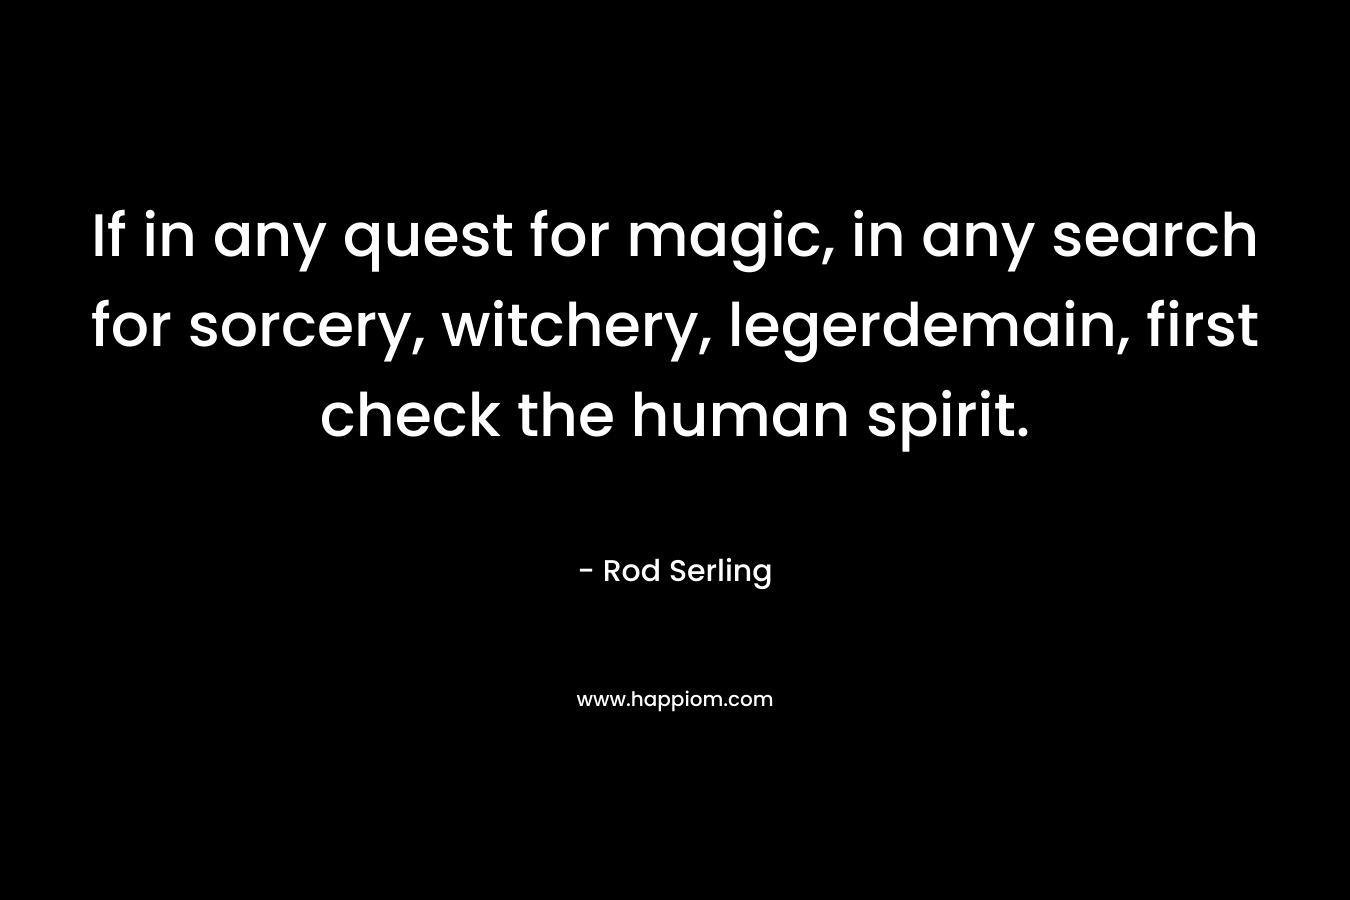 If in any quest for magic, in any search for sorcery, witchery, legerdemain, first check the human spirit. – Rod Serling